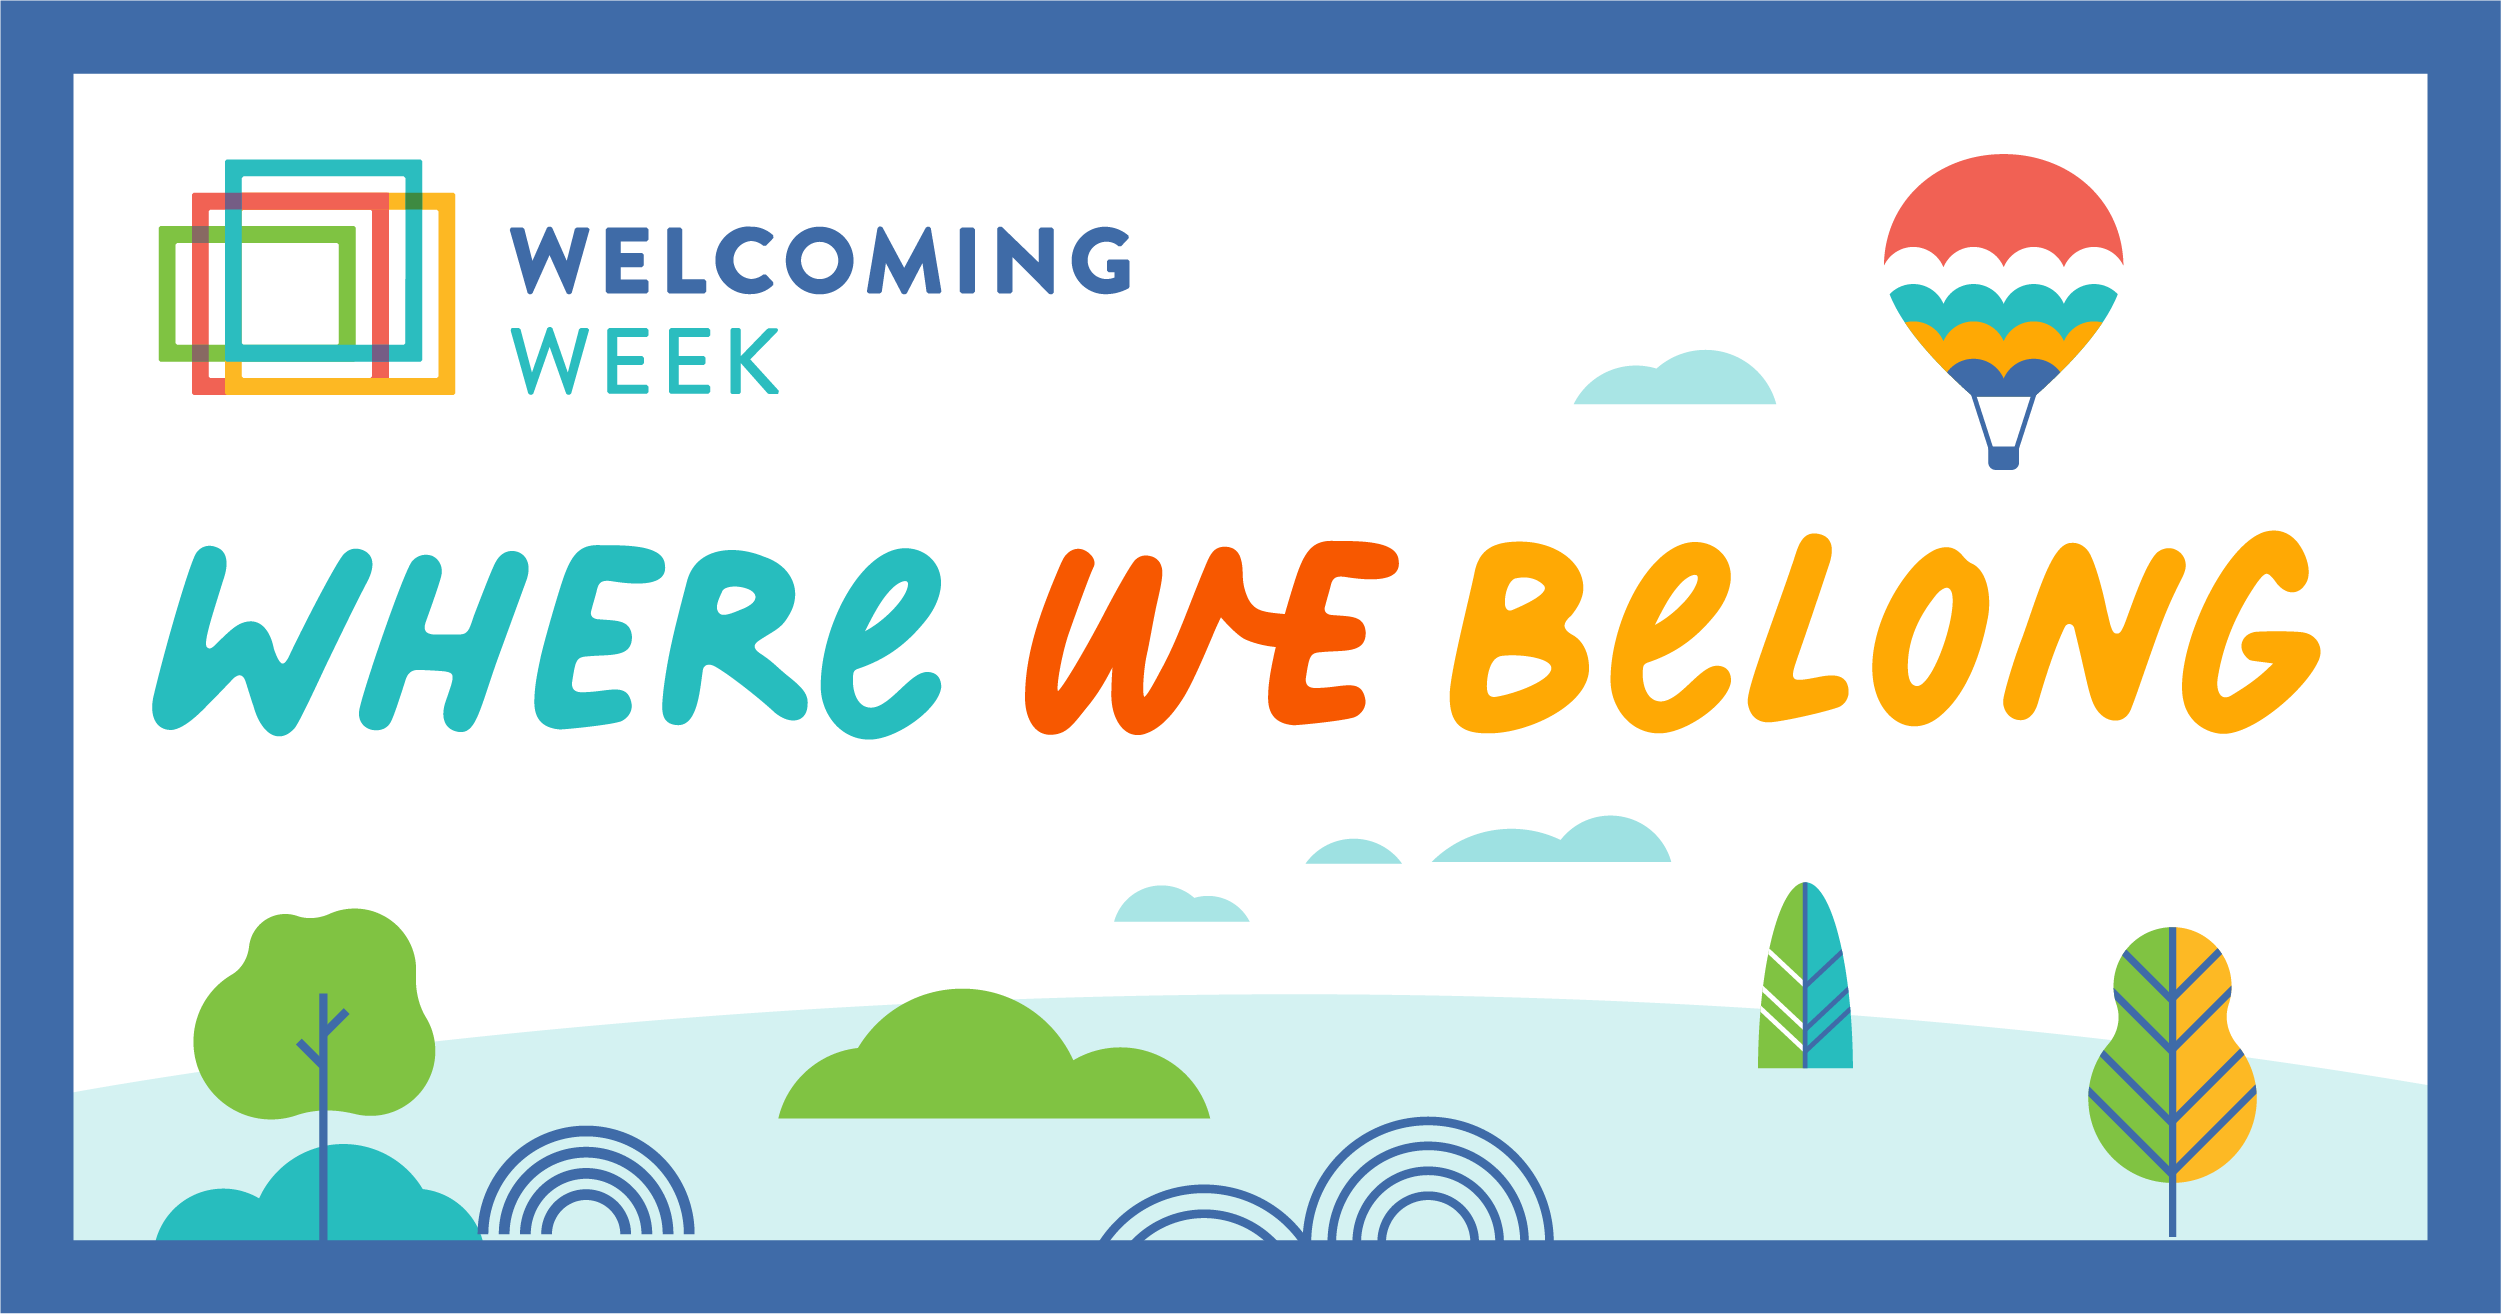 A brightly colored illustration shows a landscape with an air balloon in the sky, the Welcoming Week logo and copy that says, "Where We Belong".